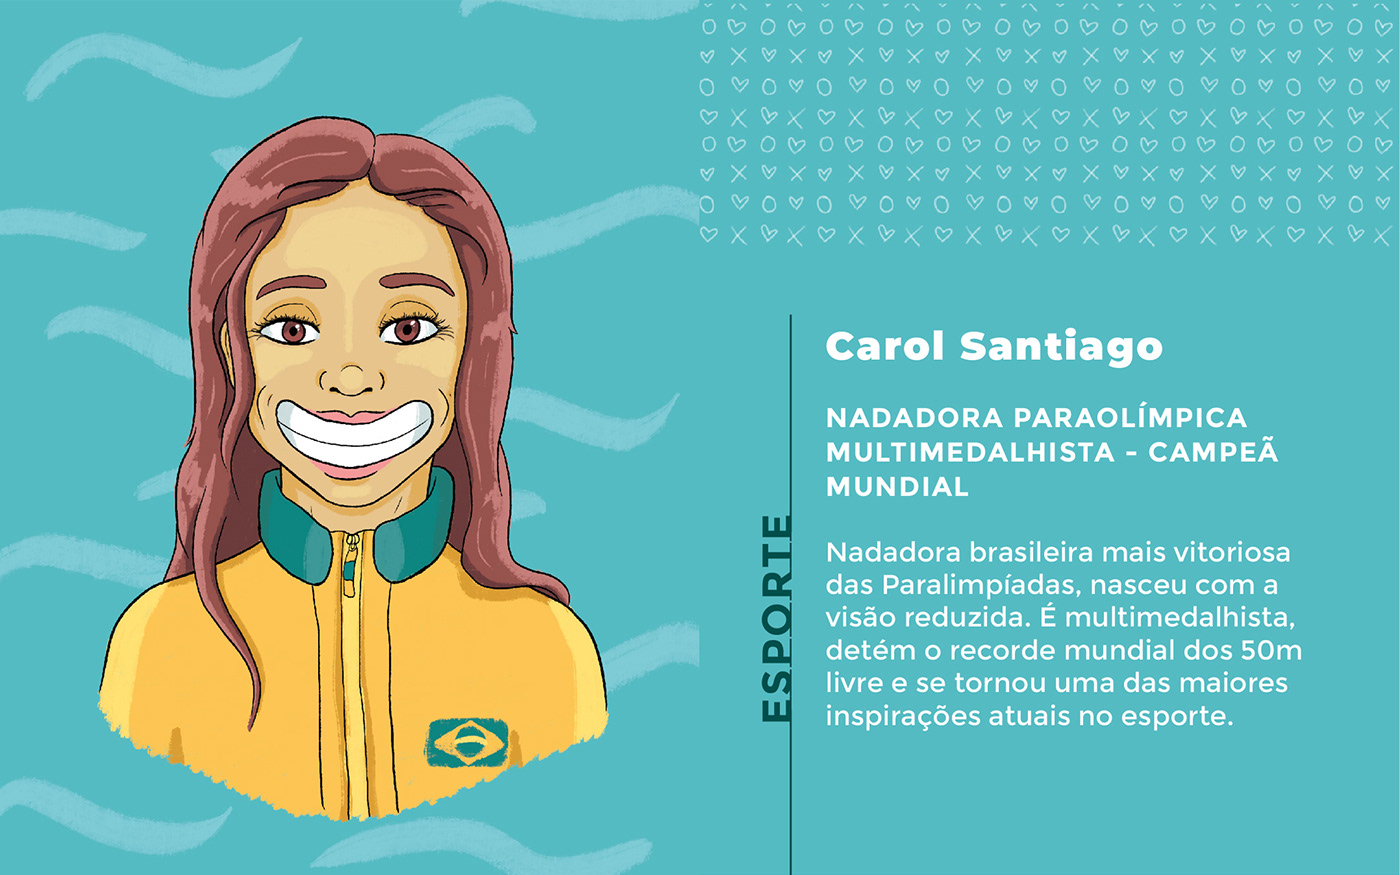 An illustrated portrait of Carol Santiago a famous Paralympic swimmer.